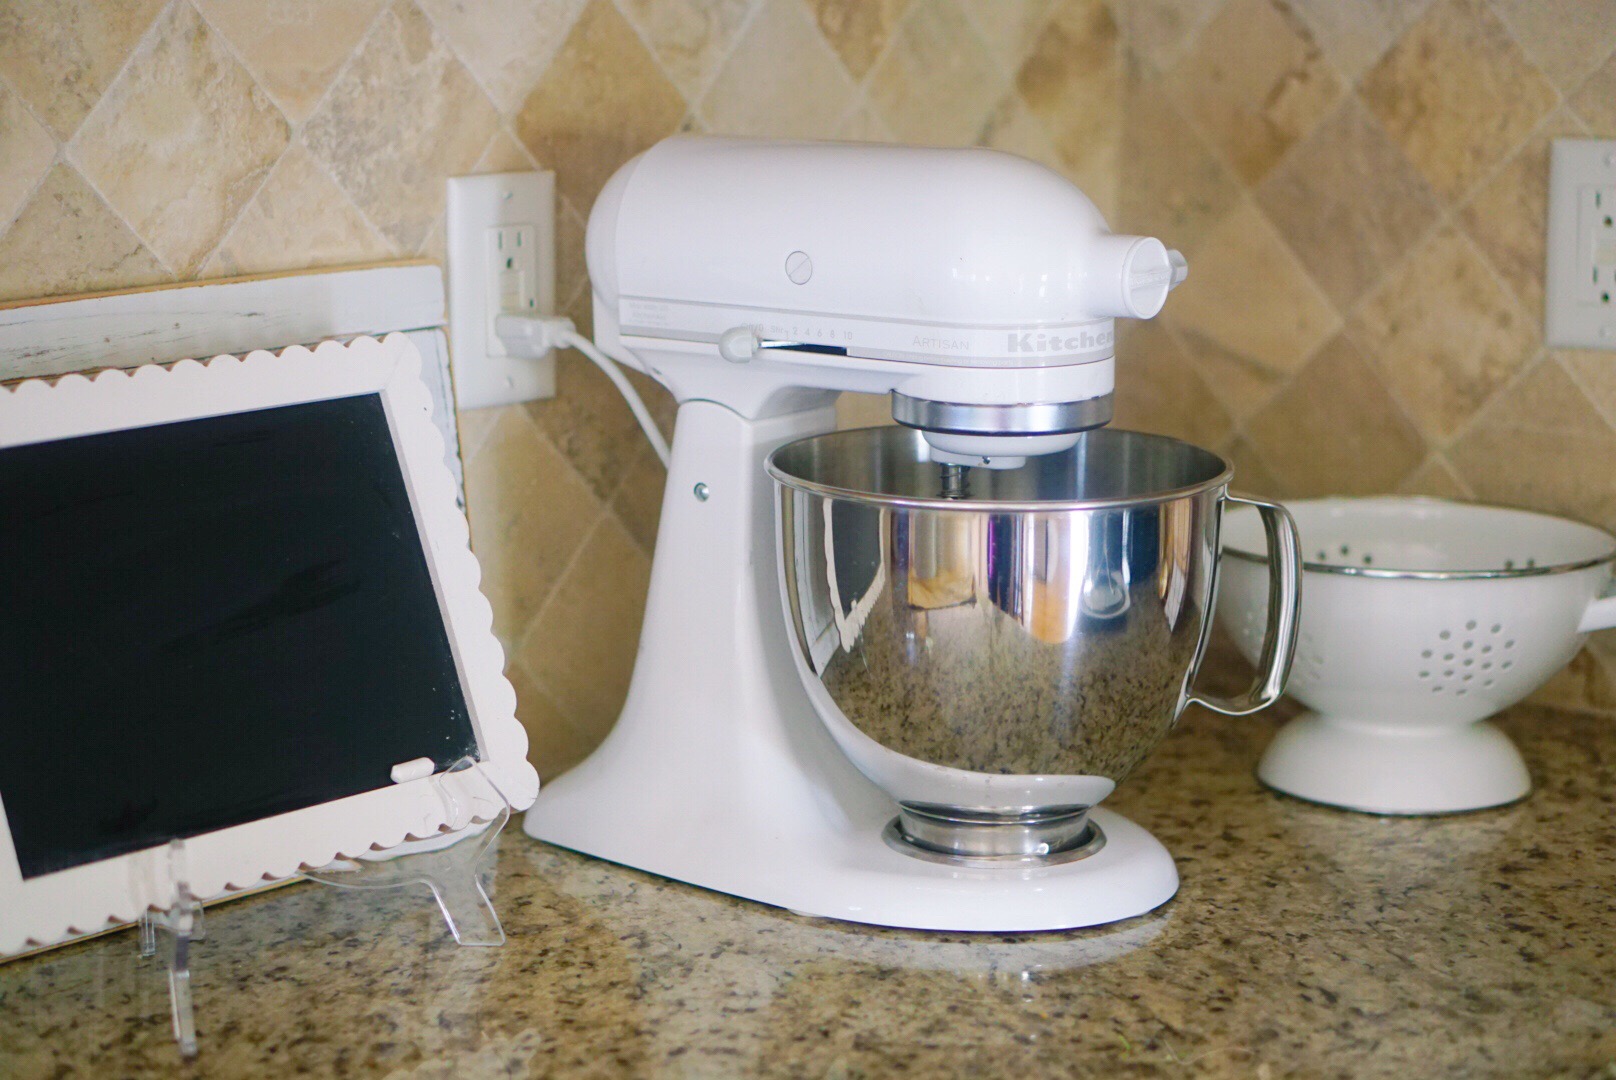 Kitchen Essentials - Kitchen Aid Mixer - You Can Shop For no eBay - ebay home goods via Misty Nelson, lifestyle blogger ad parenting influencer mom at frostedblog @frostedevents 